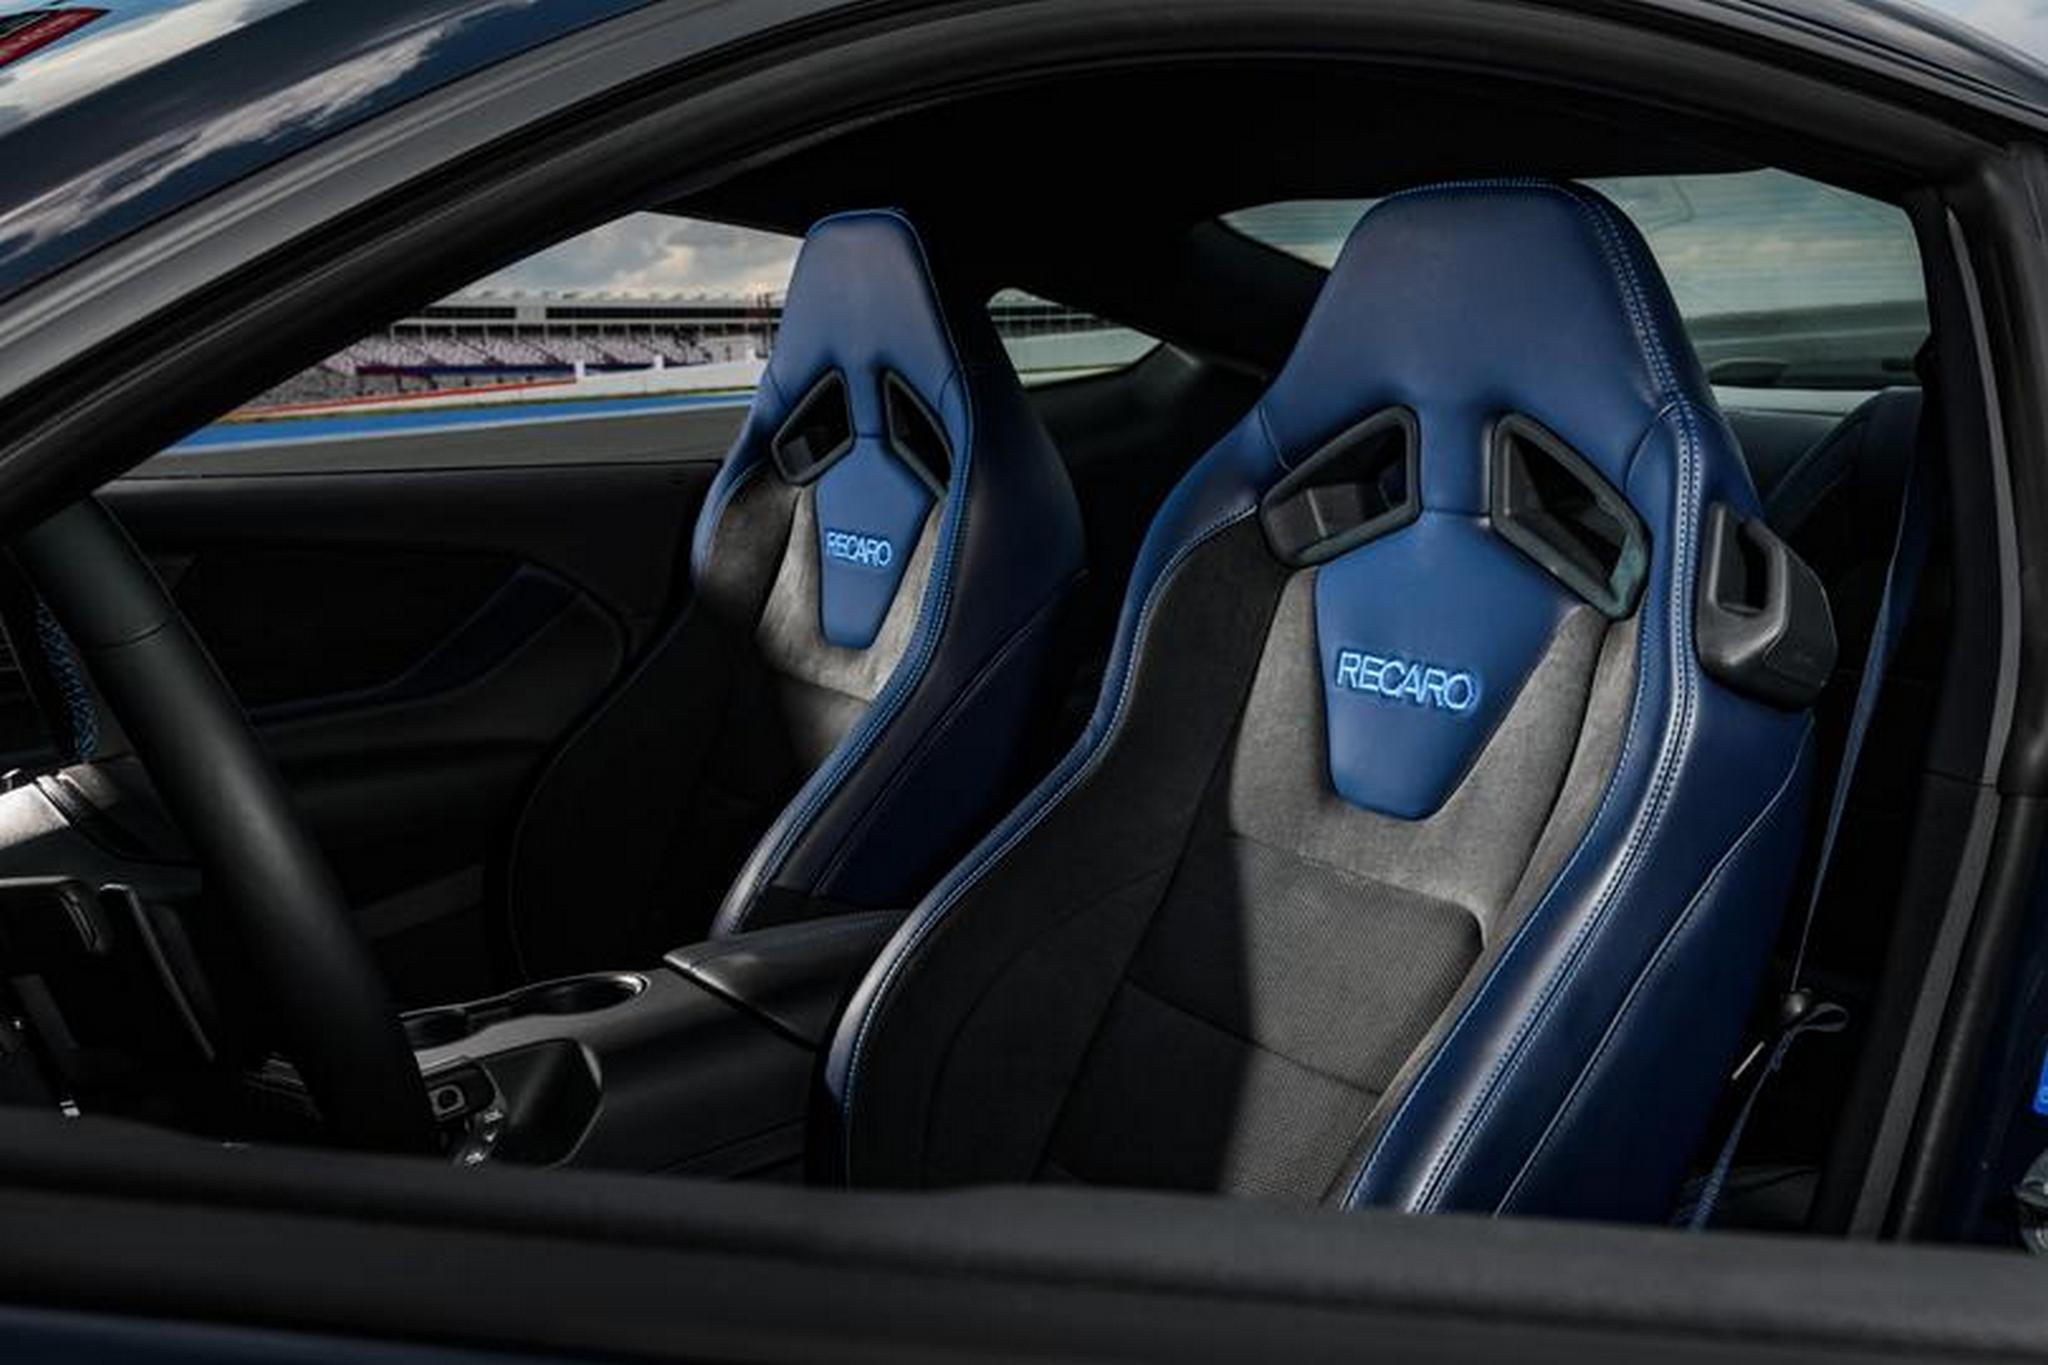 2024 ford mustang dark horse interior view with recaro seats view